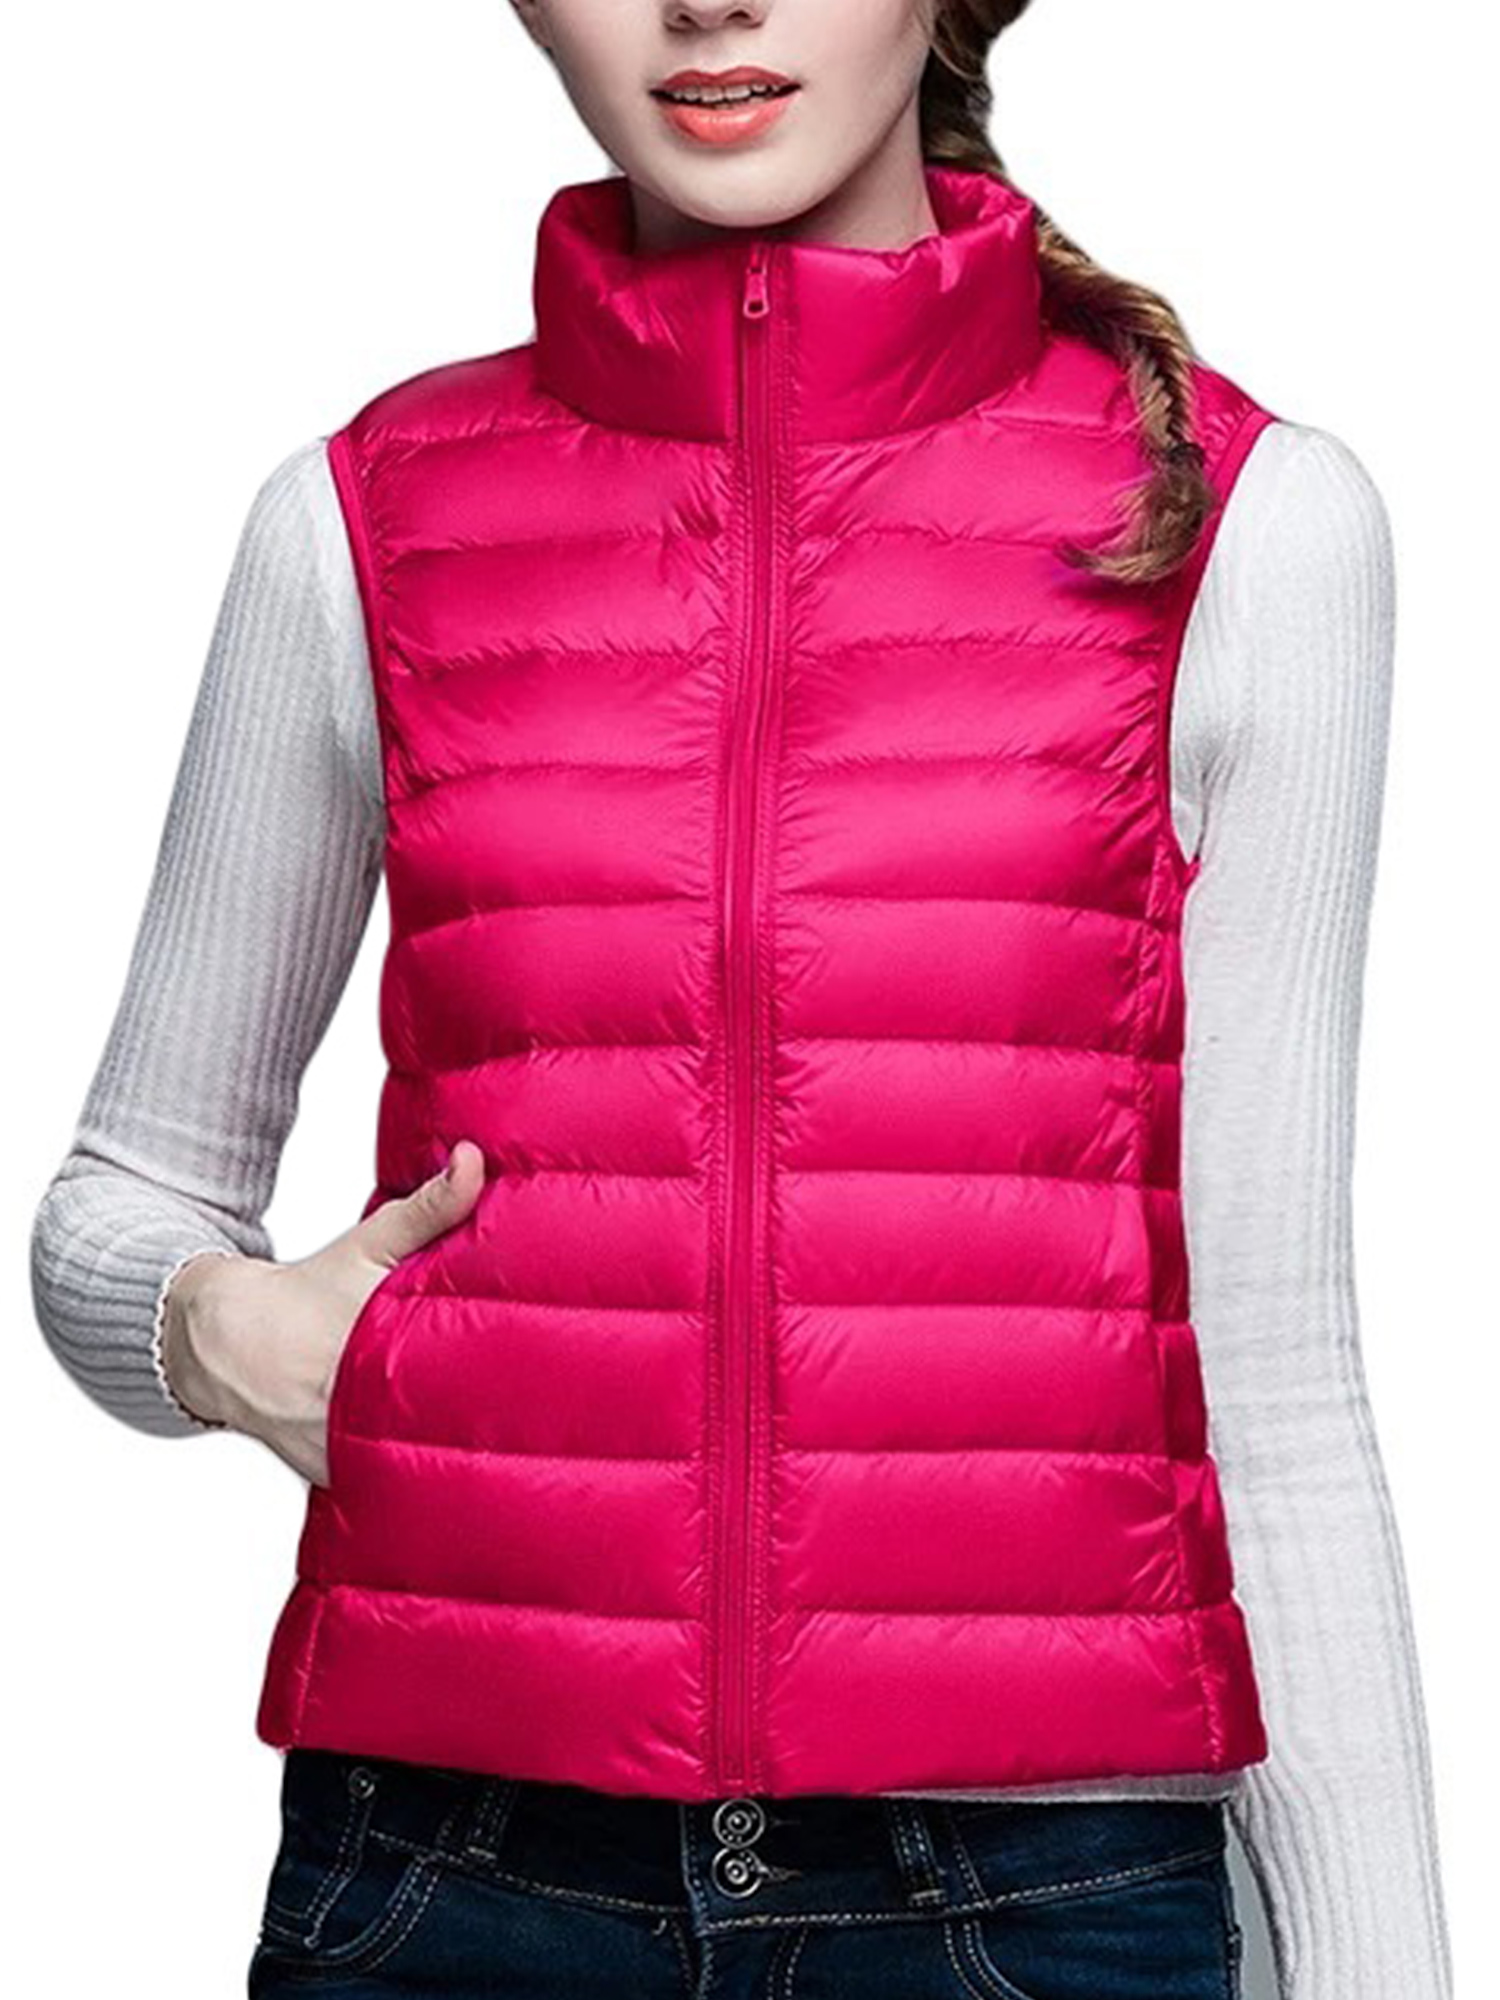 Plus Size Women Casual Stand-up Collar Zip Up Gilet Quilted Padded Vest Sleeveless Lightweight Packable Down Vest Jacket Ladies Fashion Winter Warm Puffer Outwear Vest - image 1 of 5